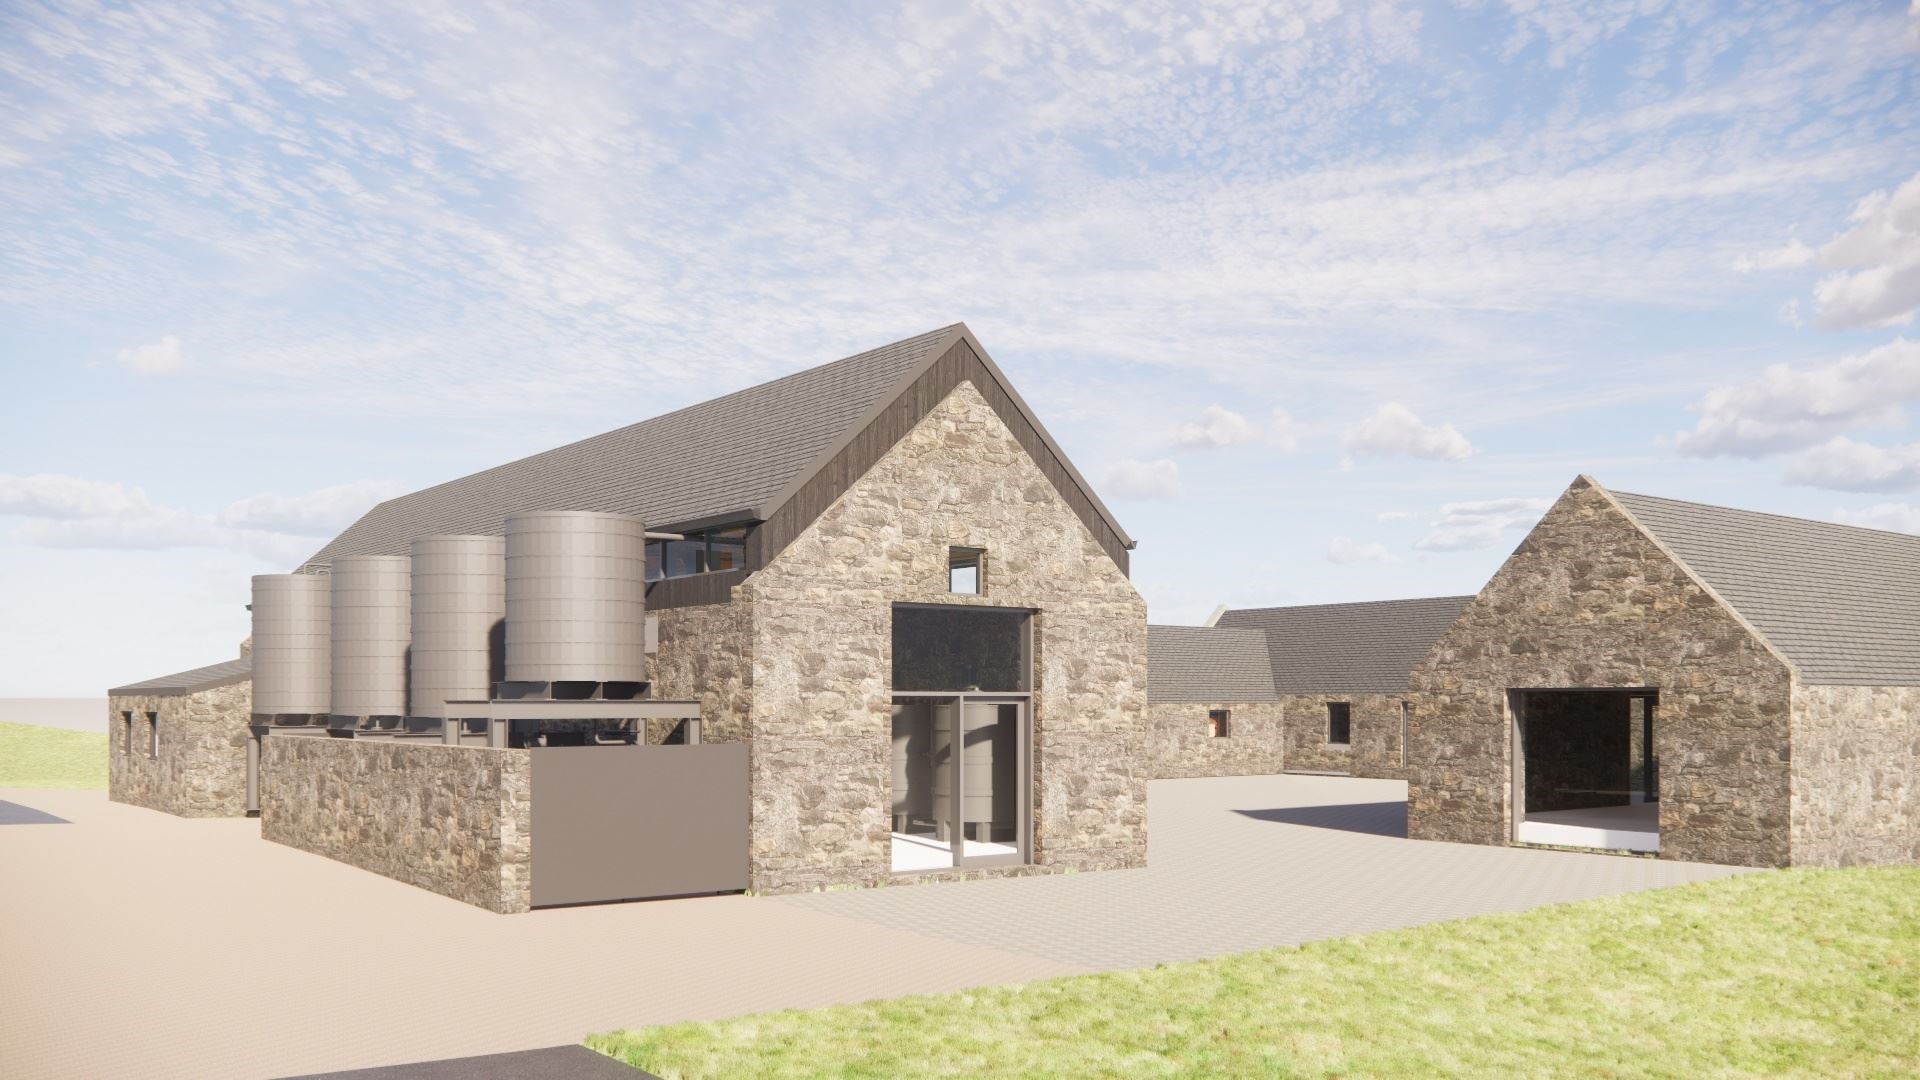 An artist's impression of what the distillery could look like.